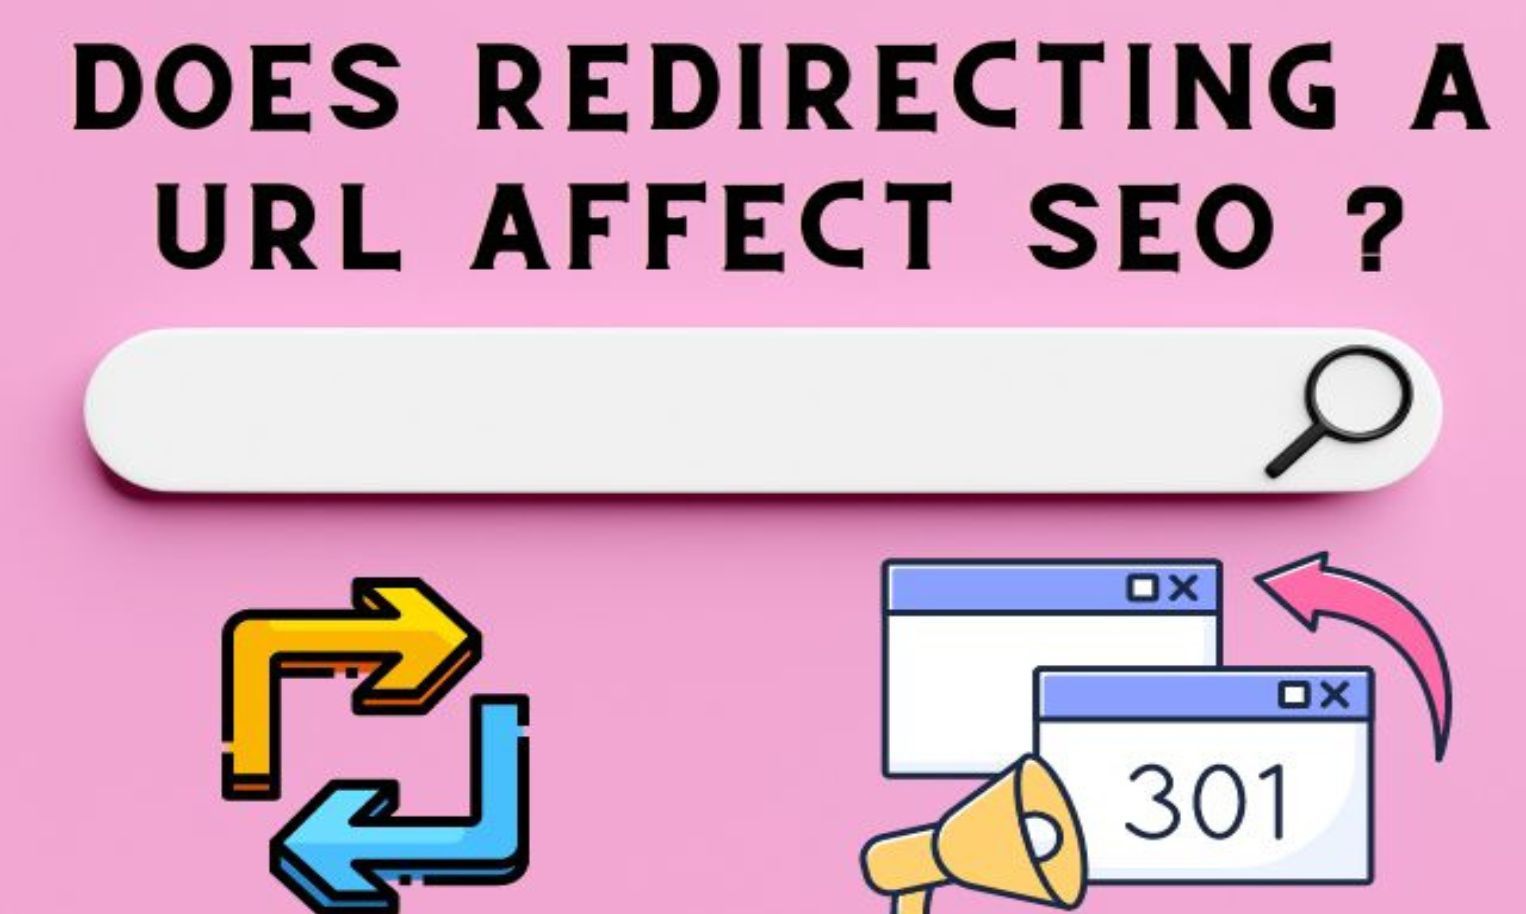 Does Redirecting A URL Affect SEO?